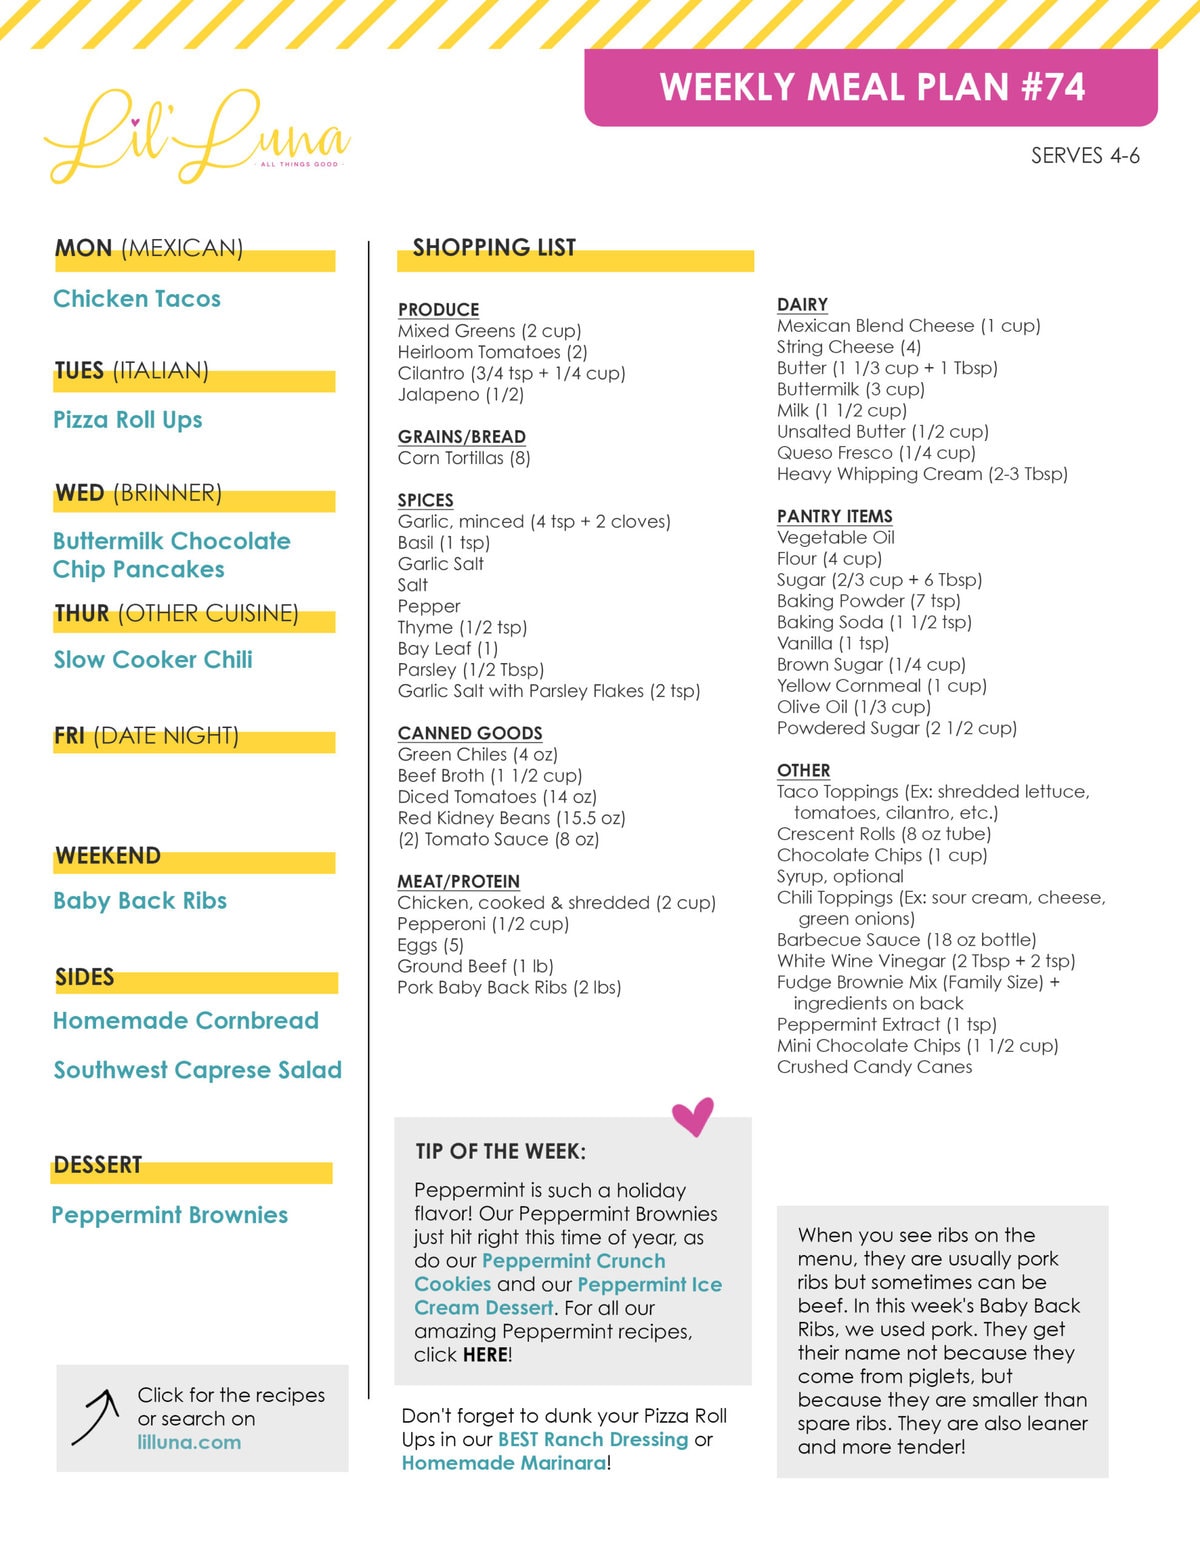 Printable version of Meal Plan #74 with grocery list.